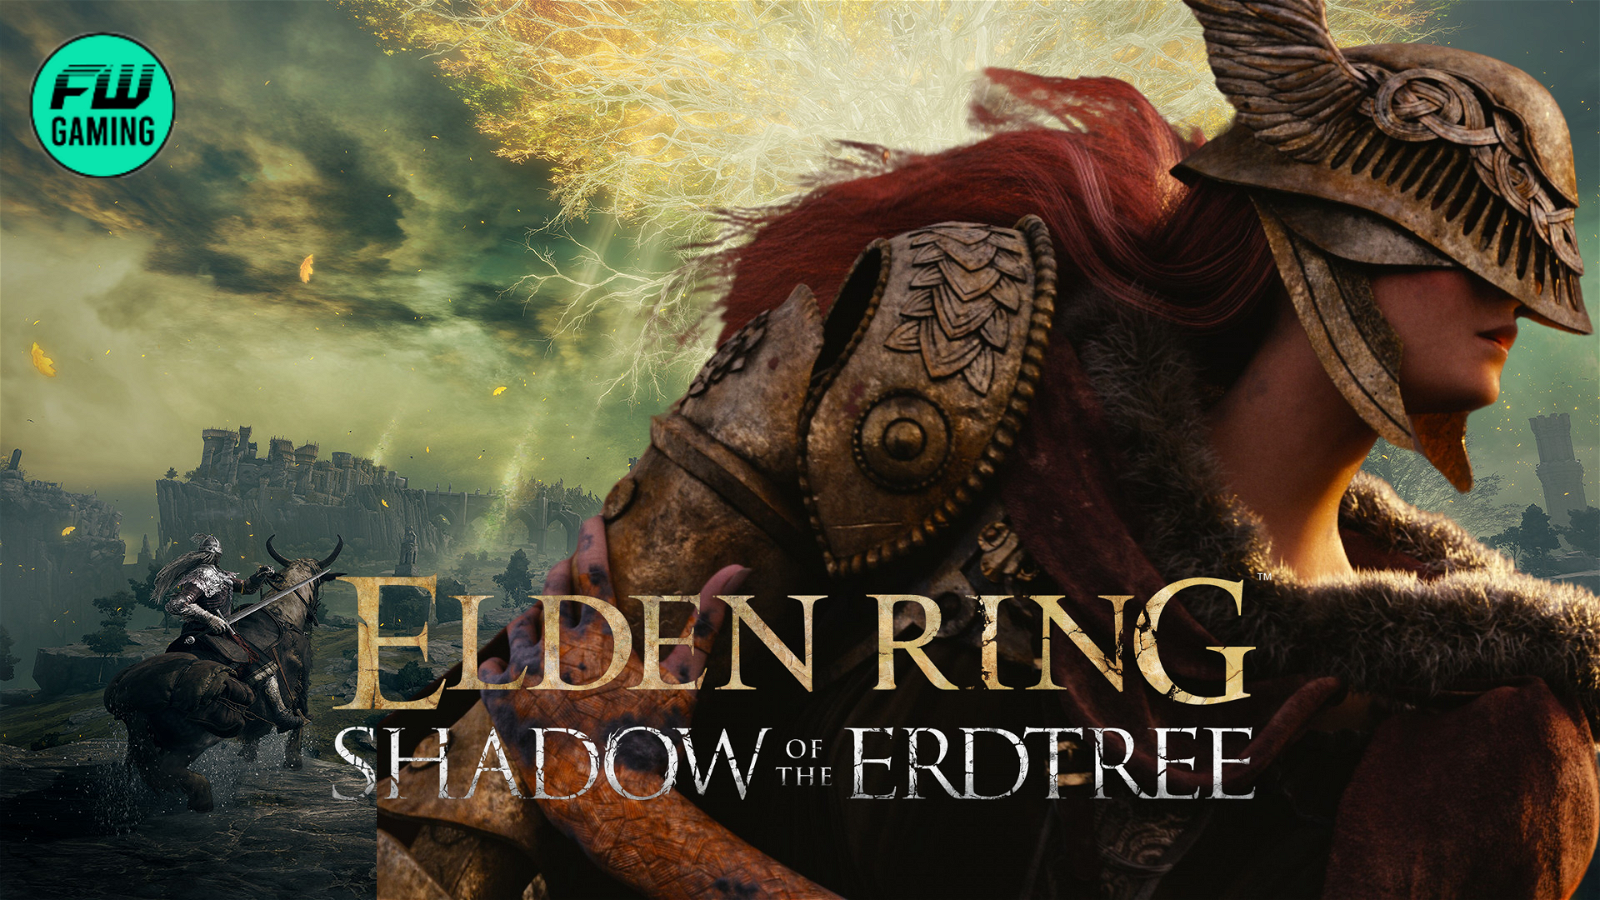 The Multiple Endings of Elden Ring Could Have Major Impacts on Shadow of the Erdtree